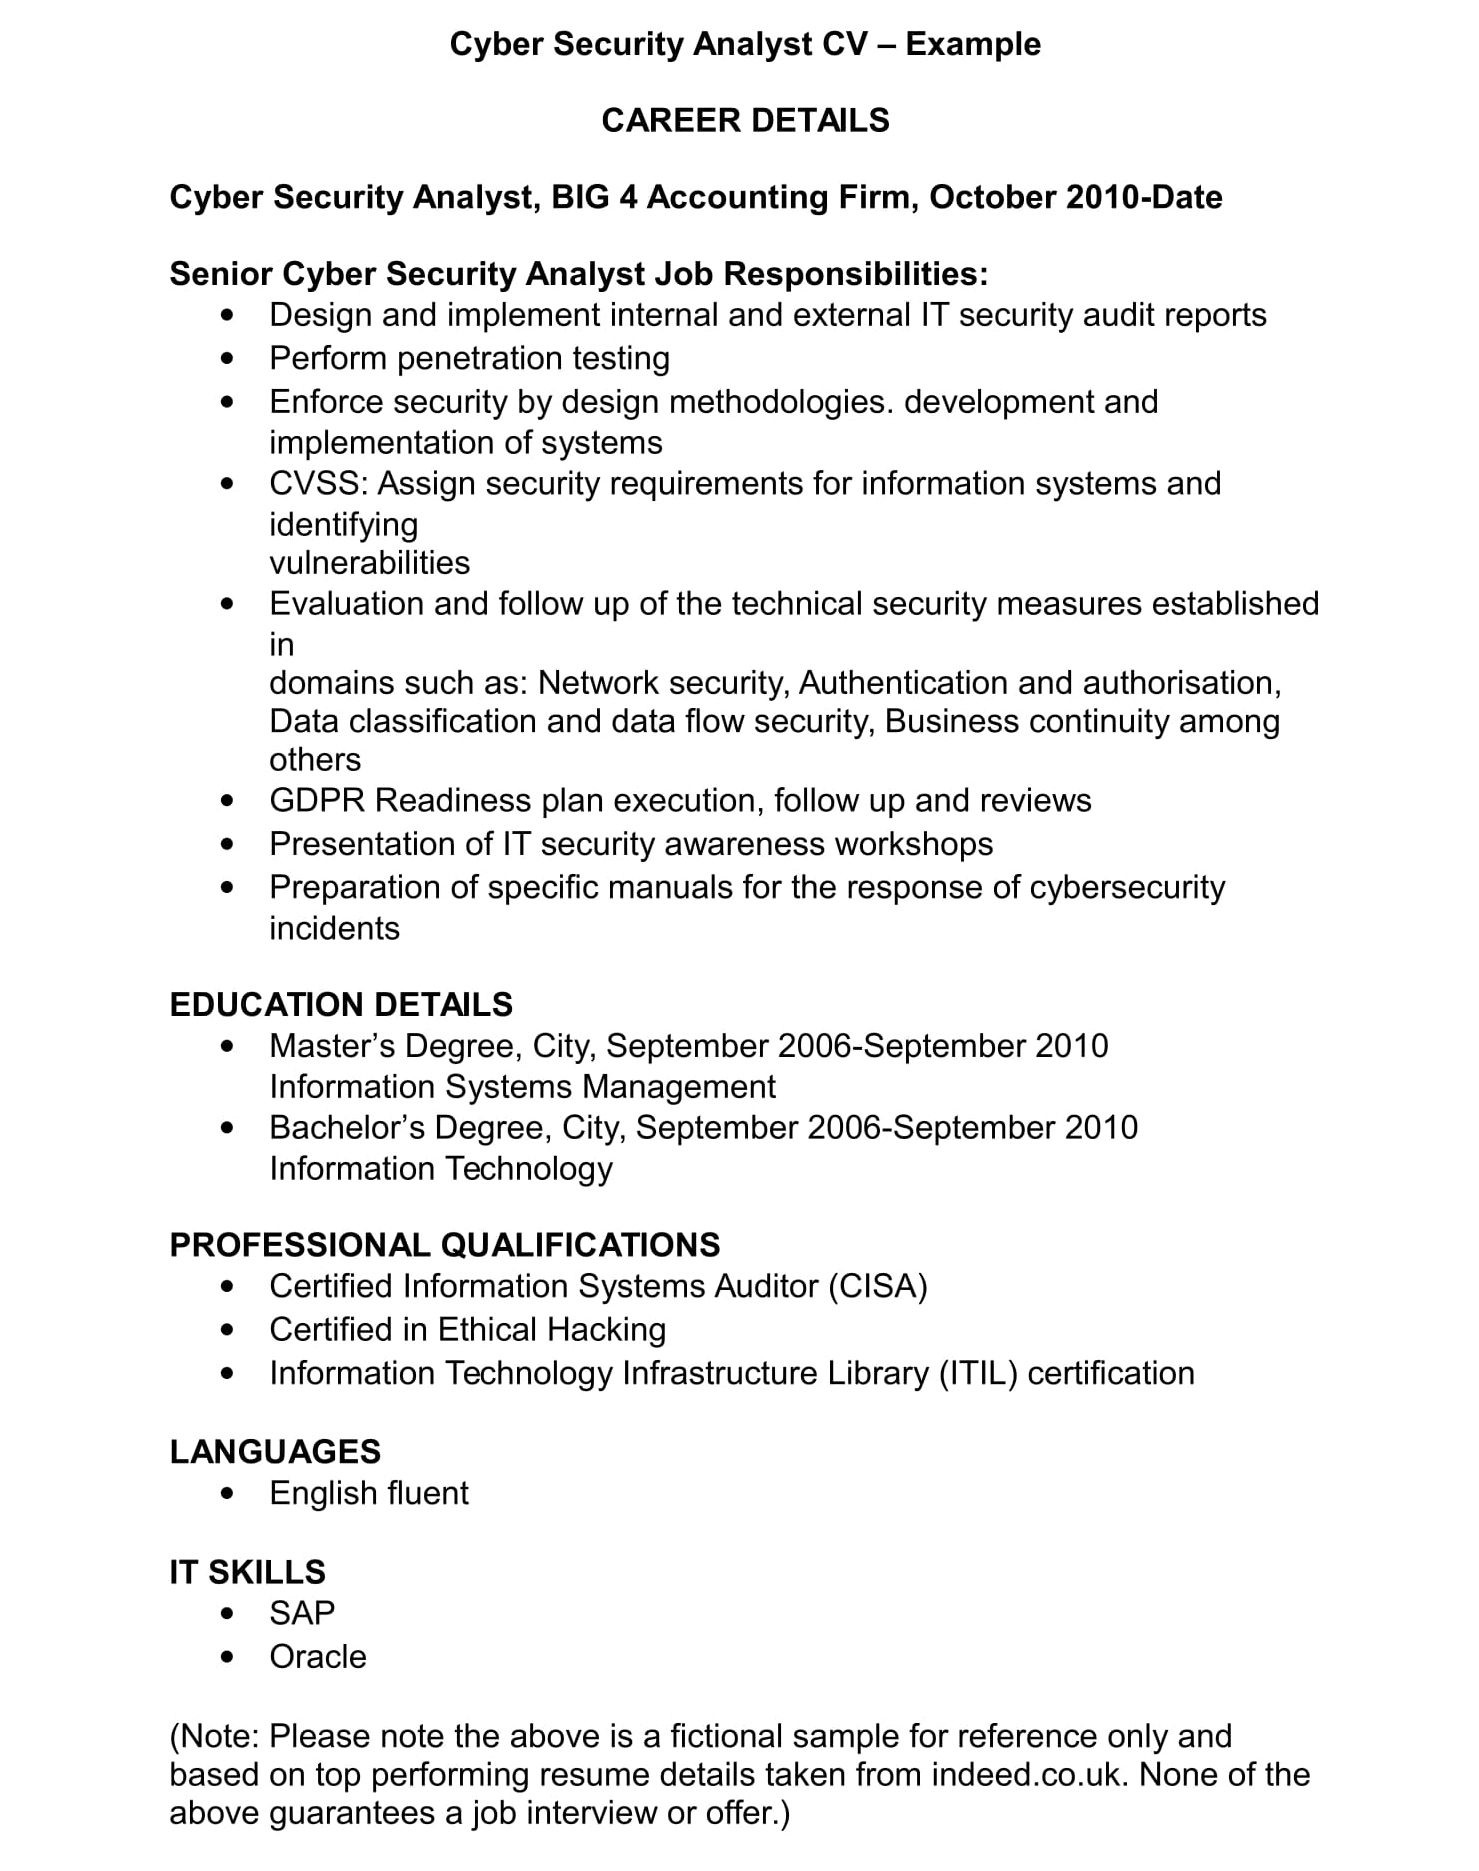 Sample Resume for Cyber Security Graduate Cyber Security Cv Template Examples Audit, Finance Management